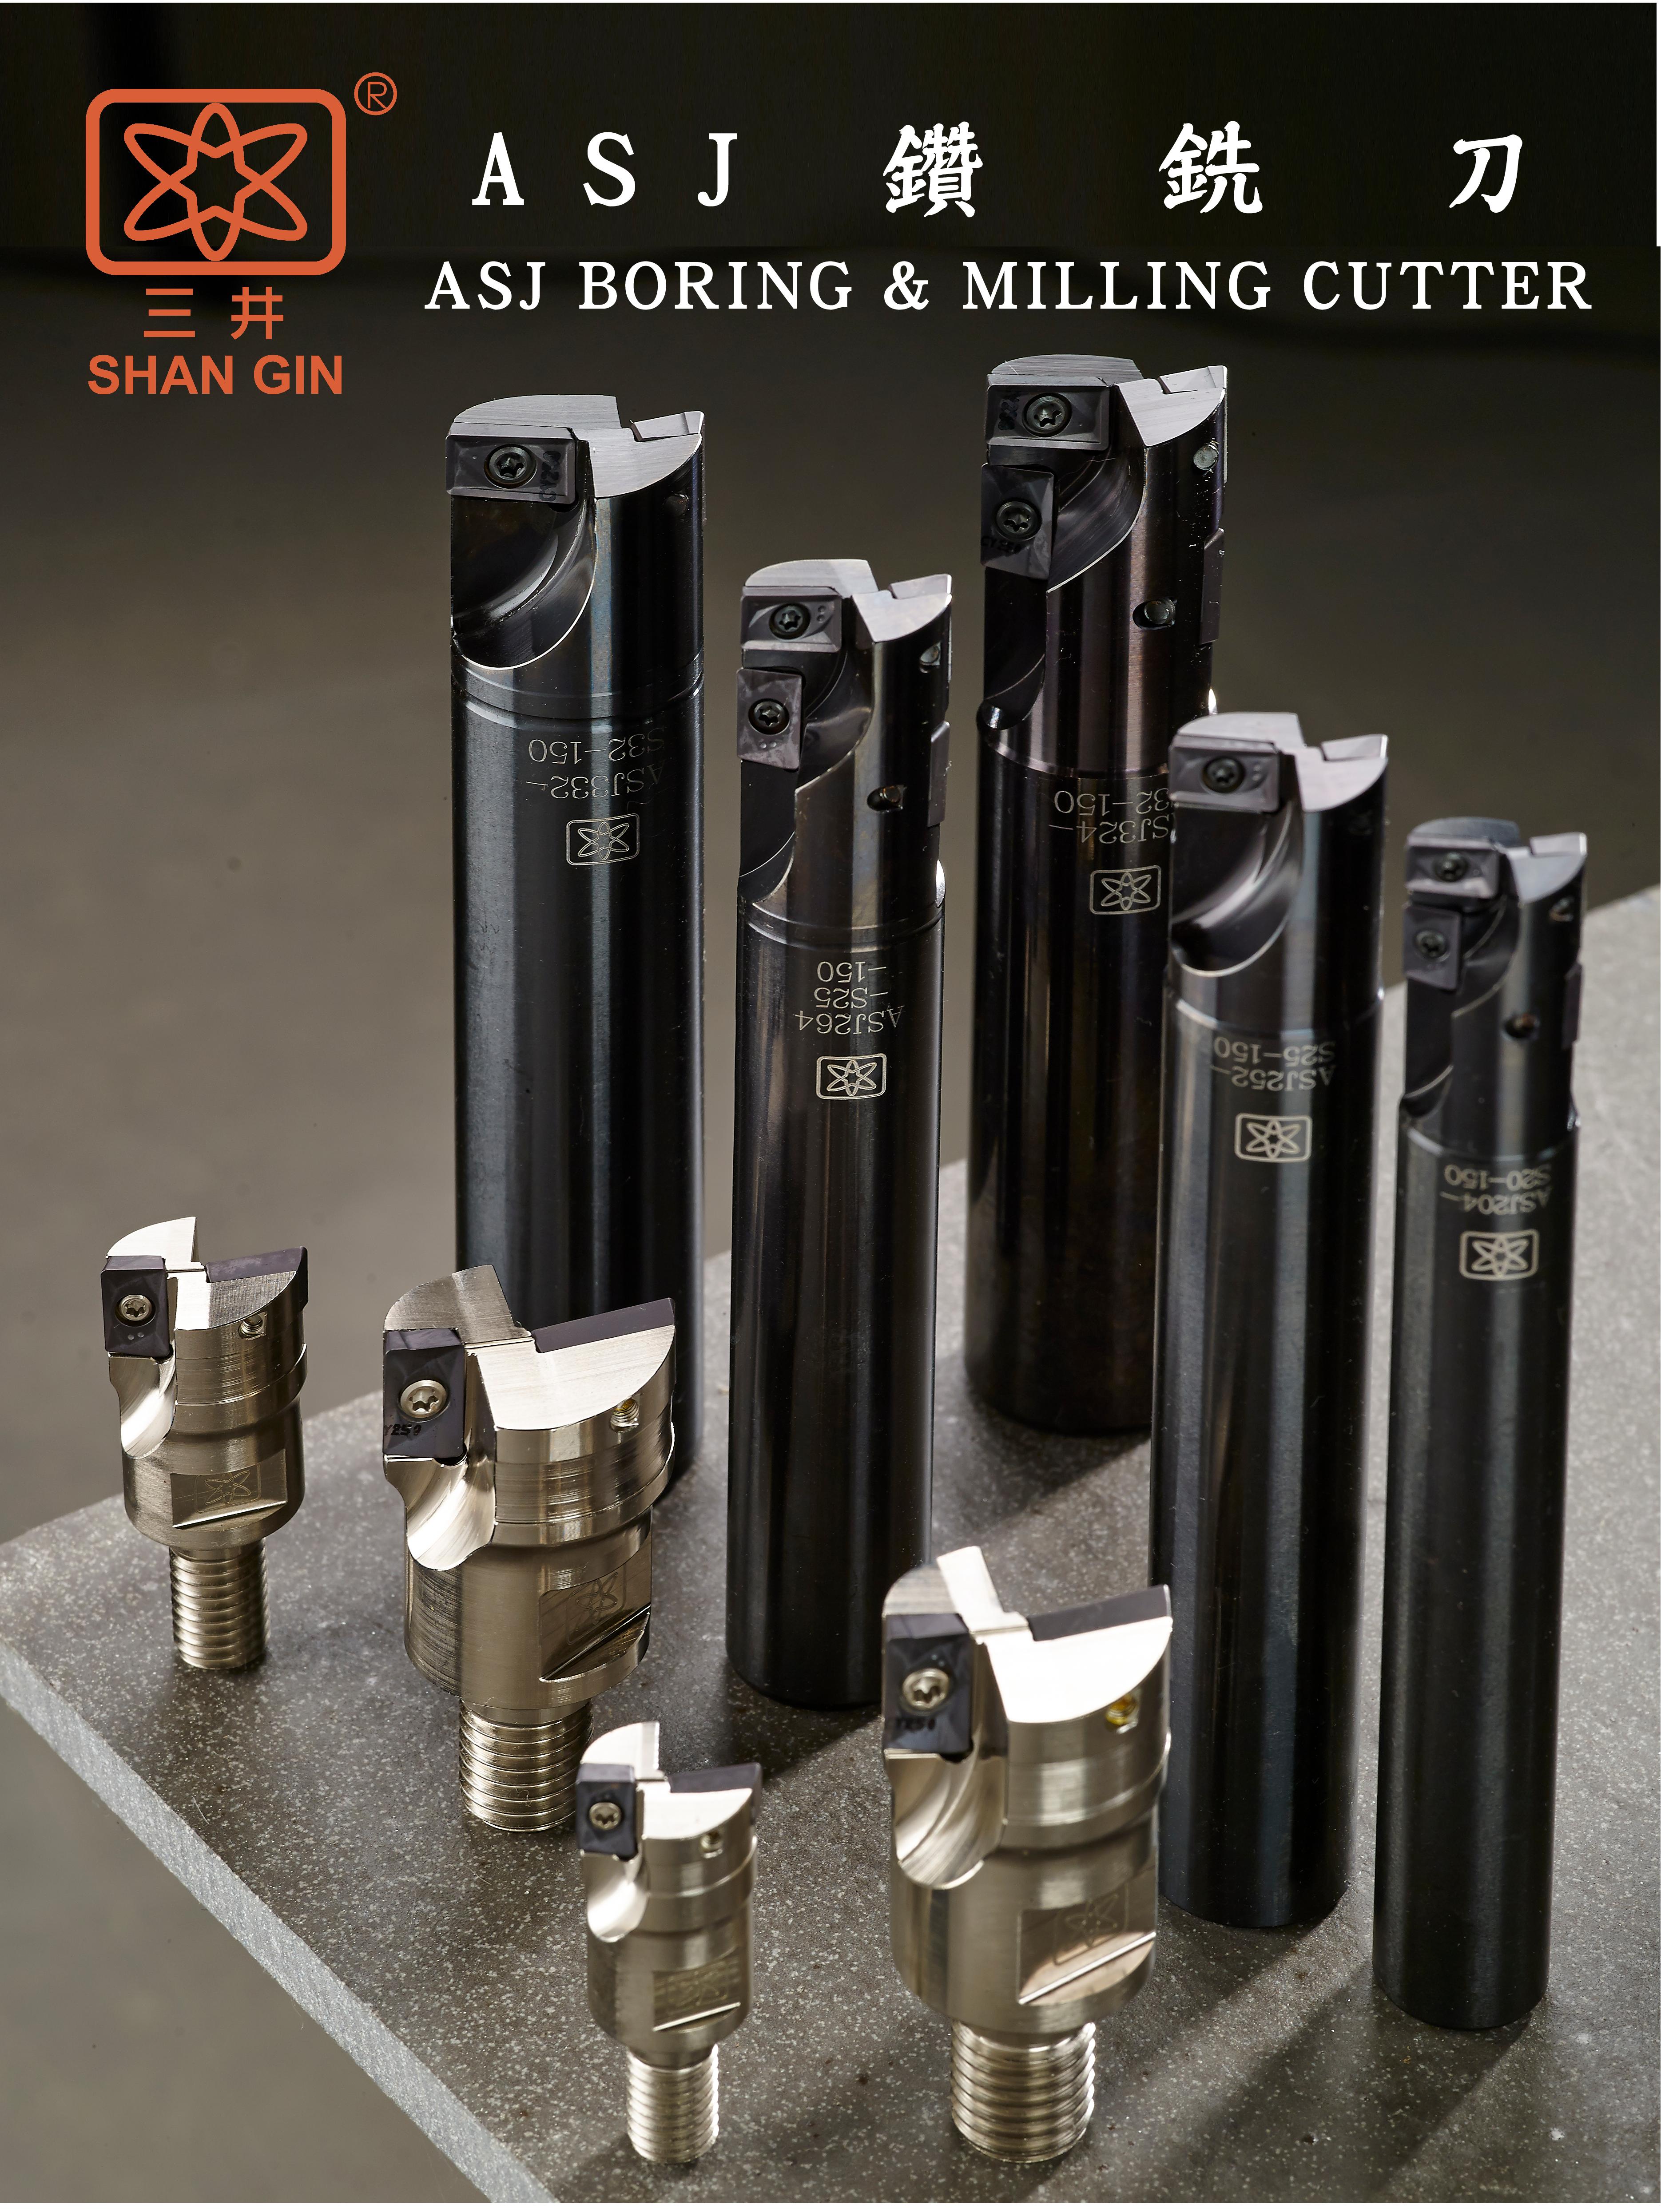 Products|ASJ BORING & MILLING CUTTER